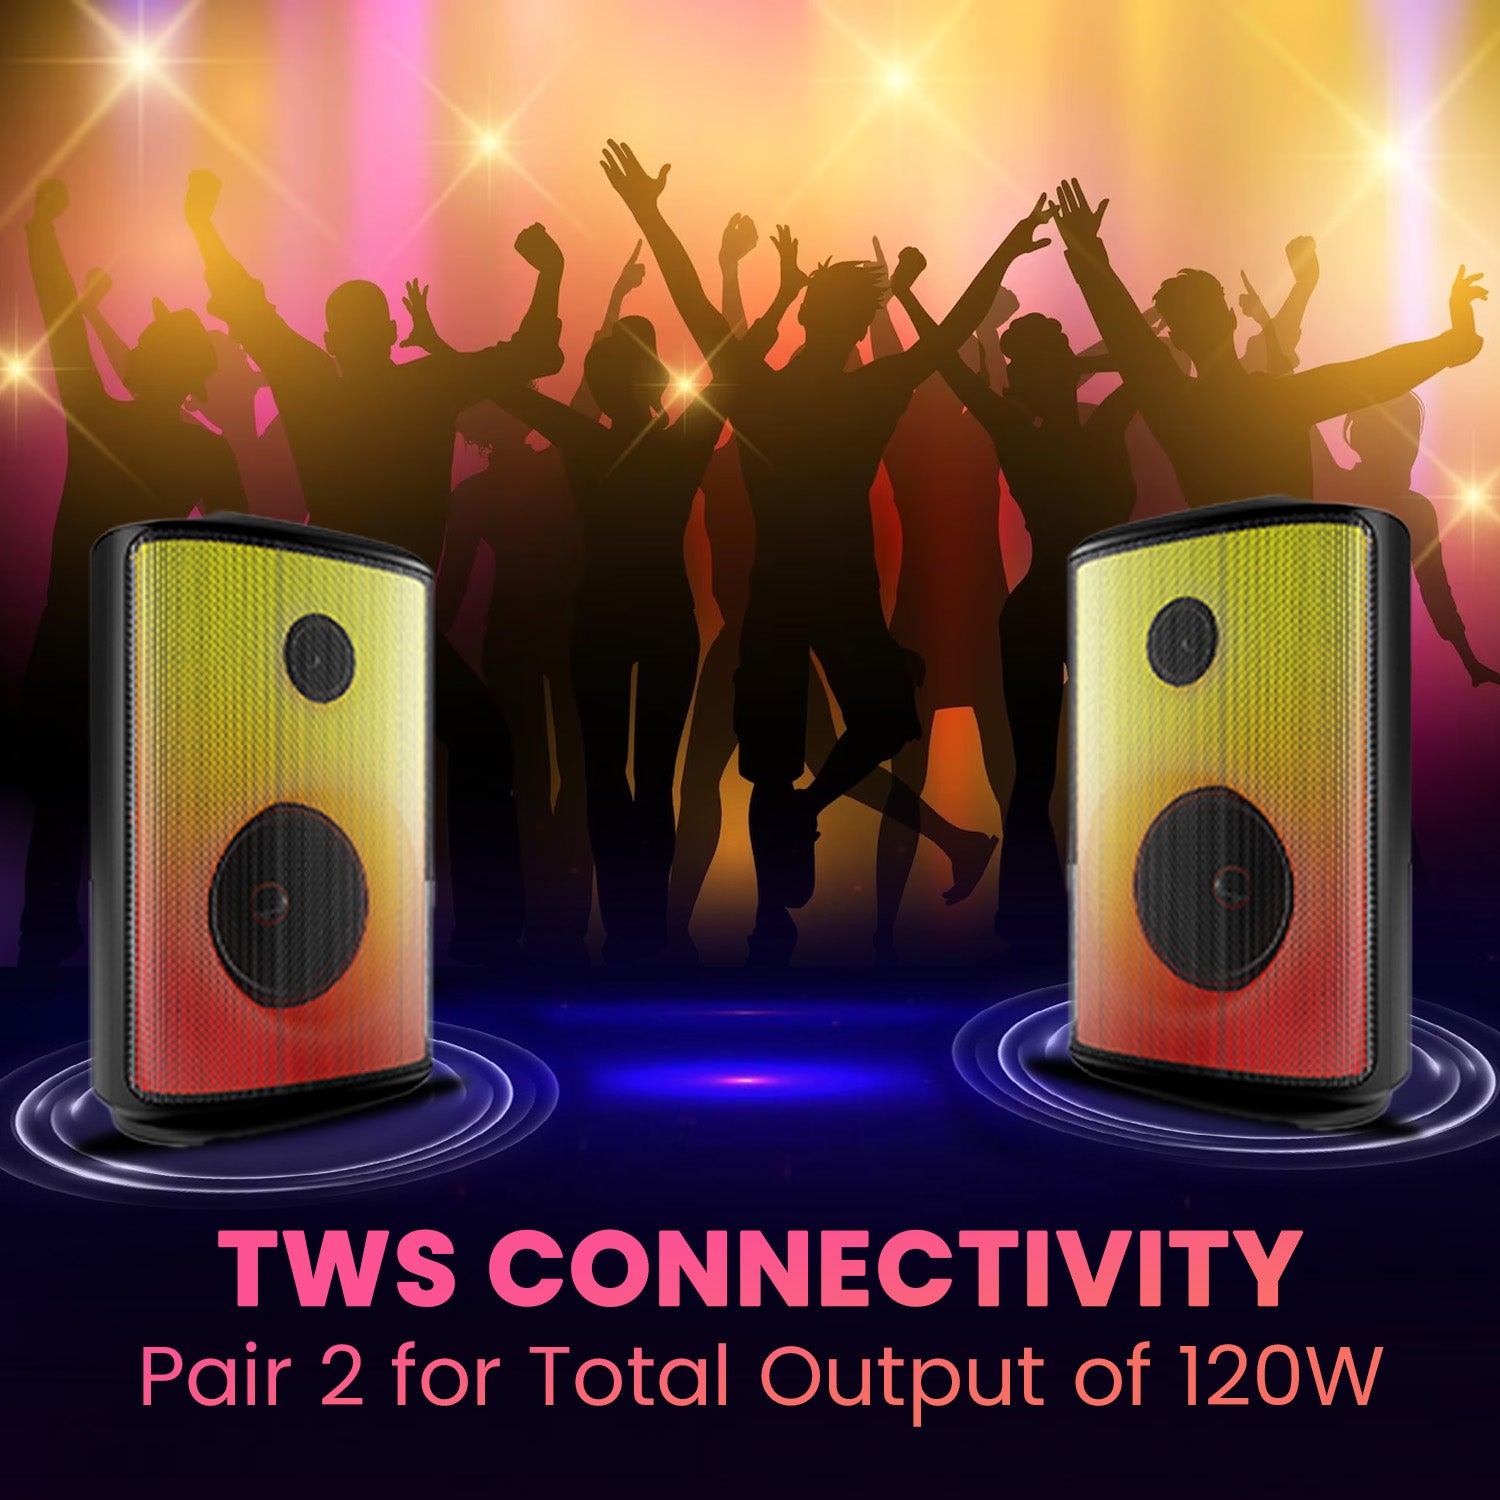 Black Portronics Dash 8 portable party speaker comes with tws connectivity for non party